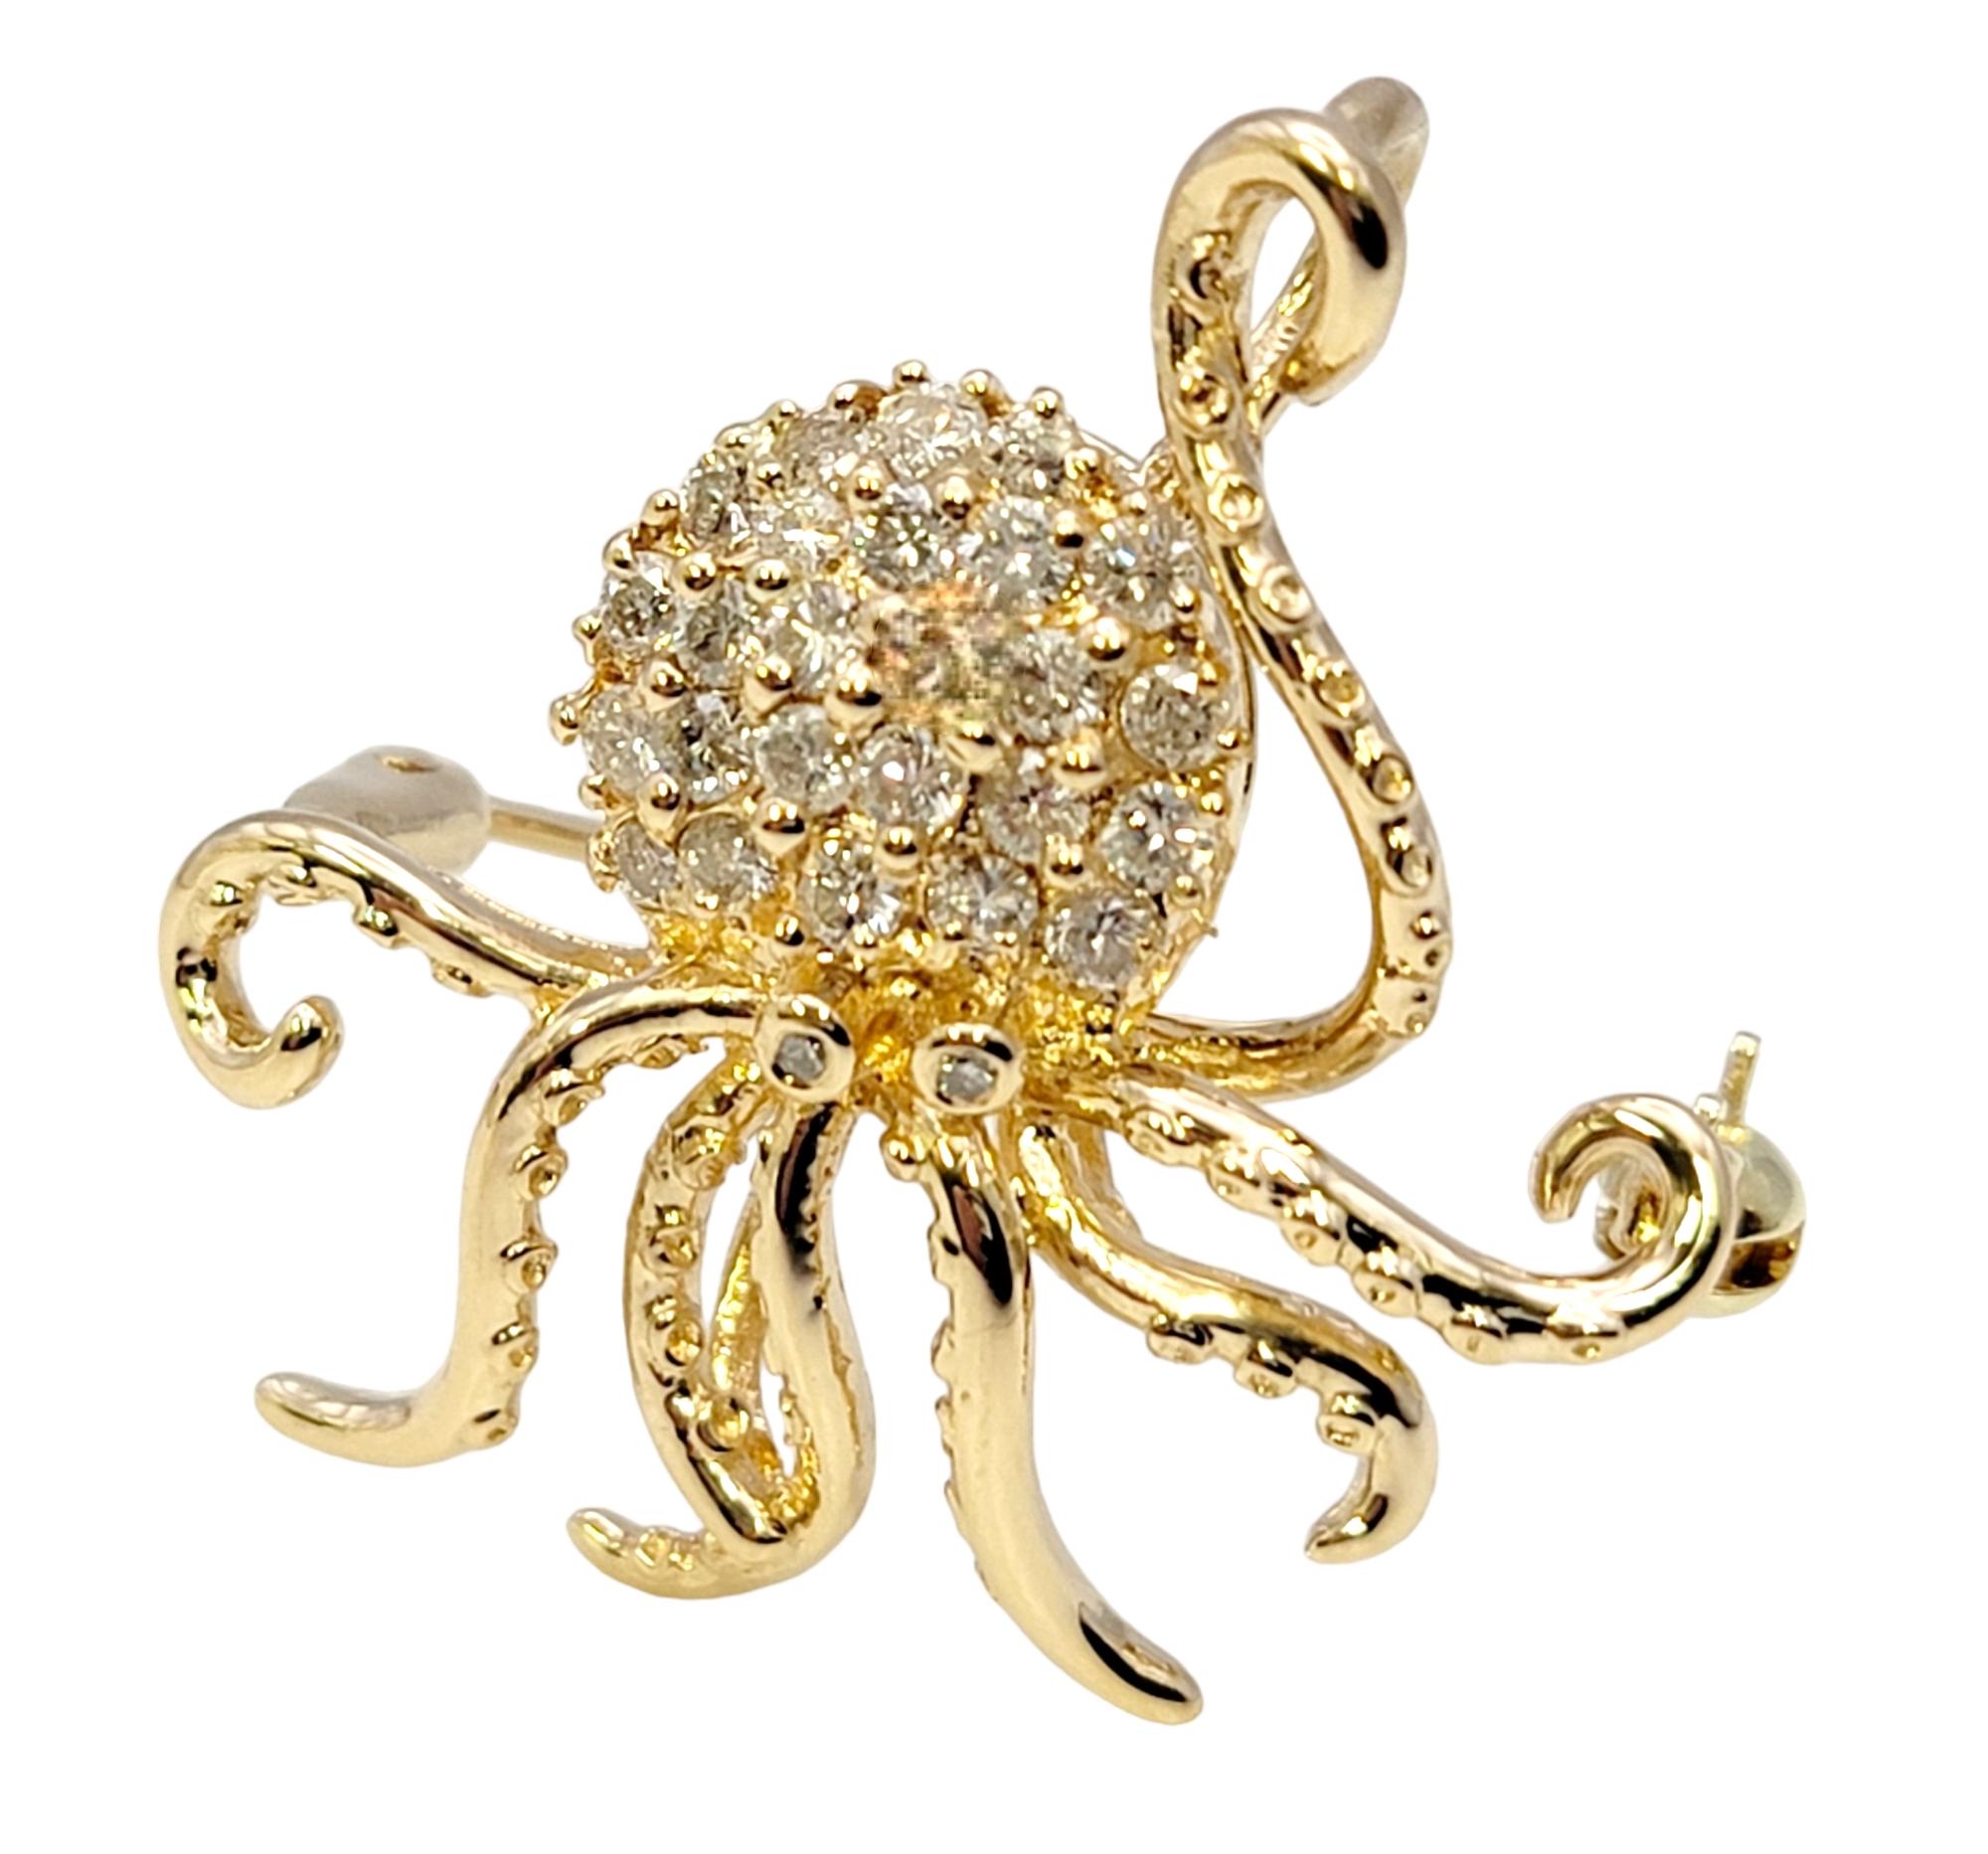 Contemporary Delightful 14 Karat Polished Yellow Gold Octopus Brooch / Pendant with Diamonds